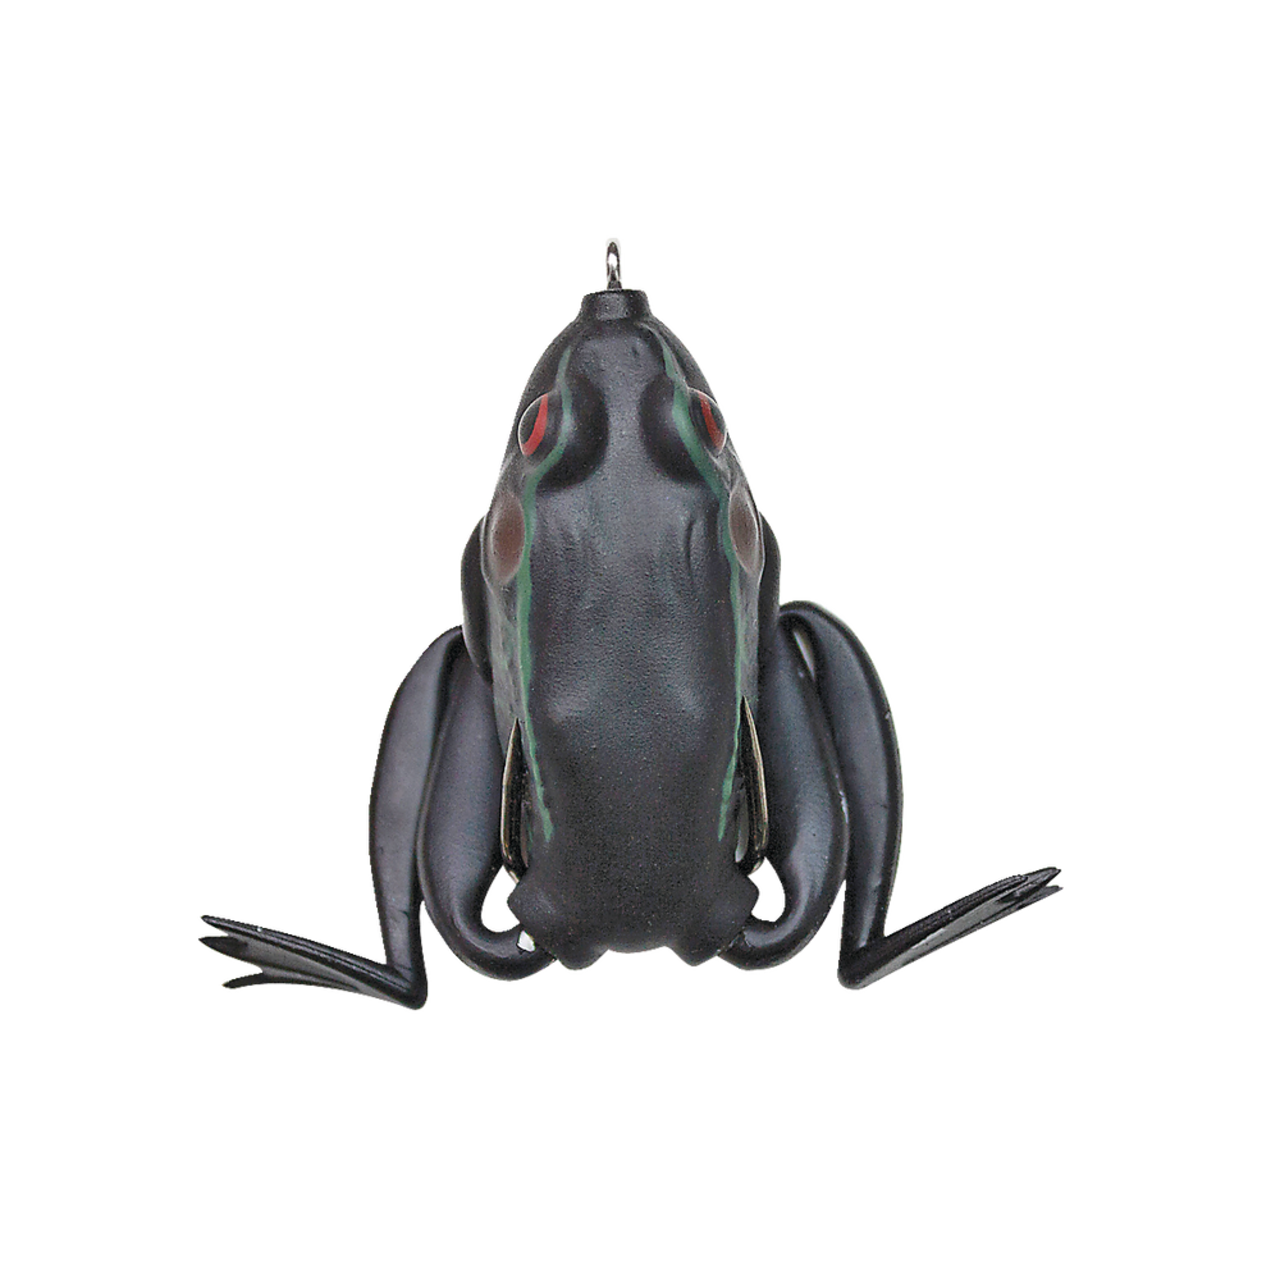 https://media-www.canadiantire.ca/product/playing/fishing/fishing-lures/0776664/lunkerhunt-lunker-frog-texas-toad-1-piece-2-25-1-2oz-d4312e65-b5dc-4c0a-93be-f47e8ad2081c.png?imdensity=1&imwidth=640&impolicy=mZoom